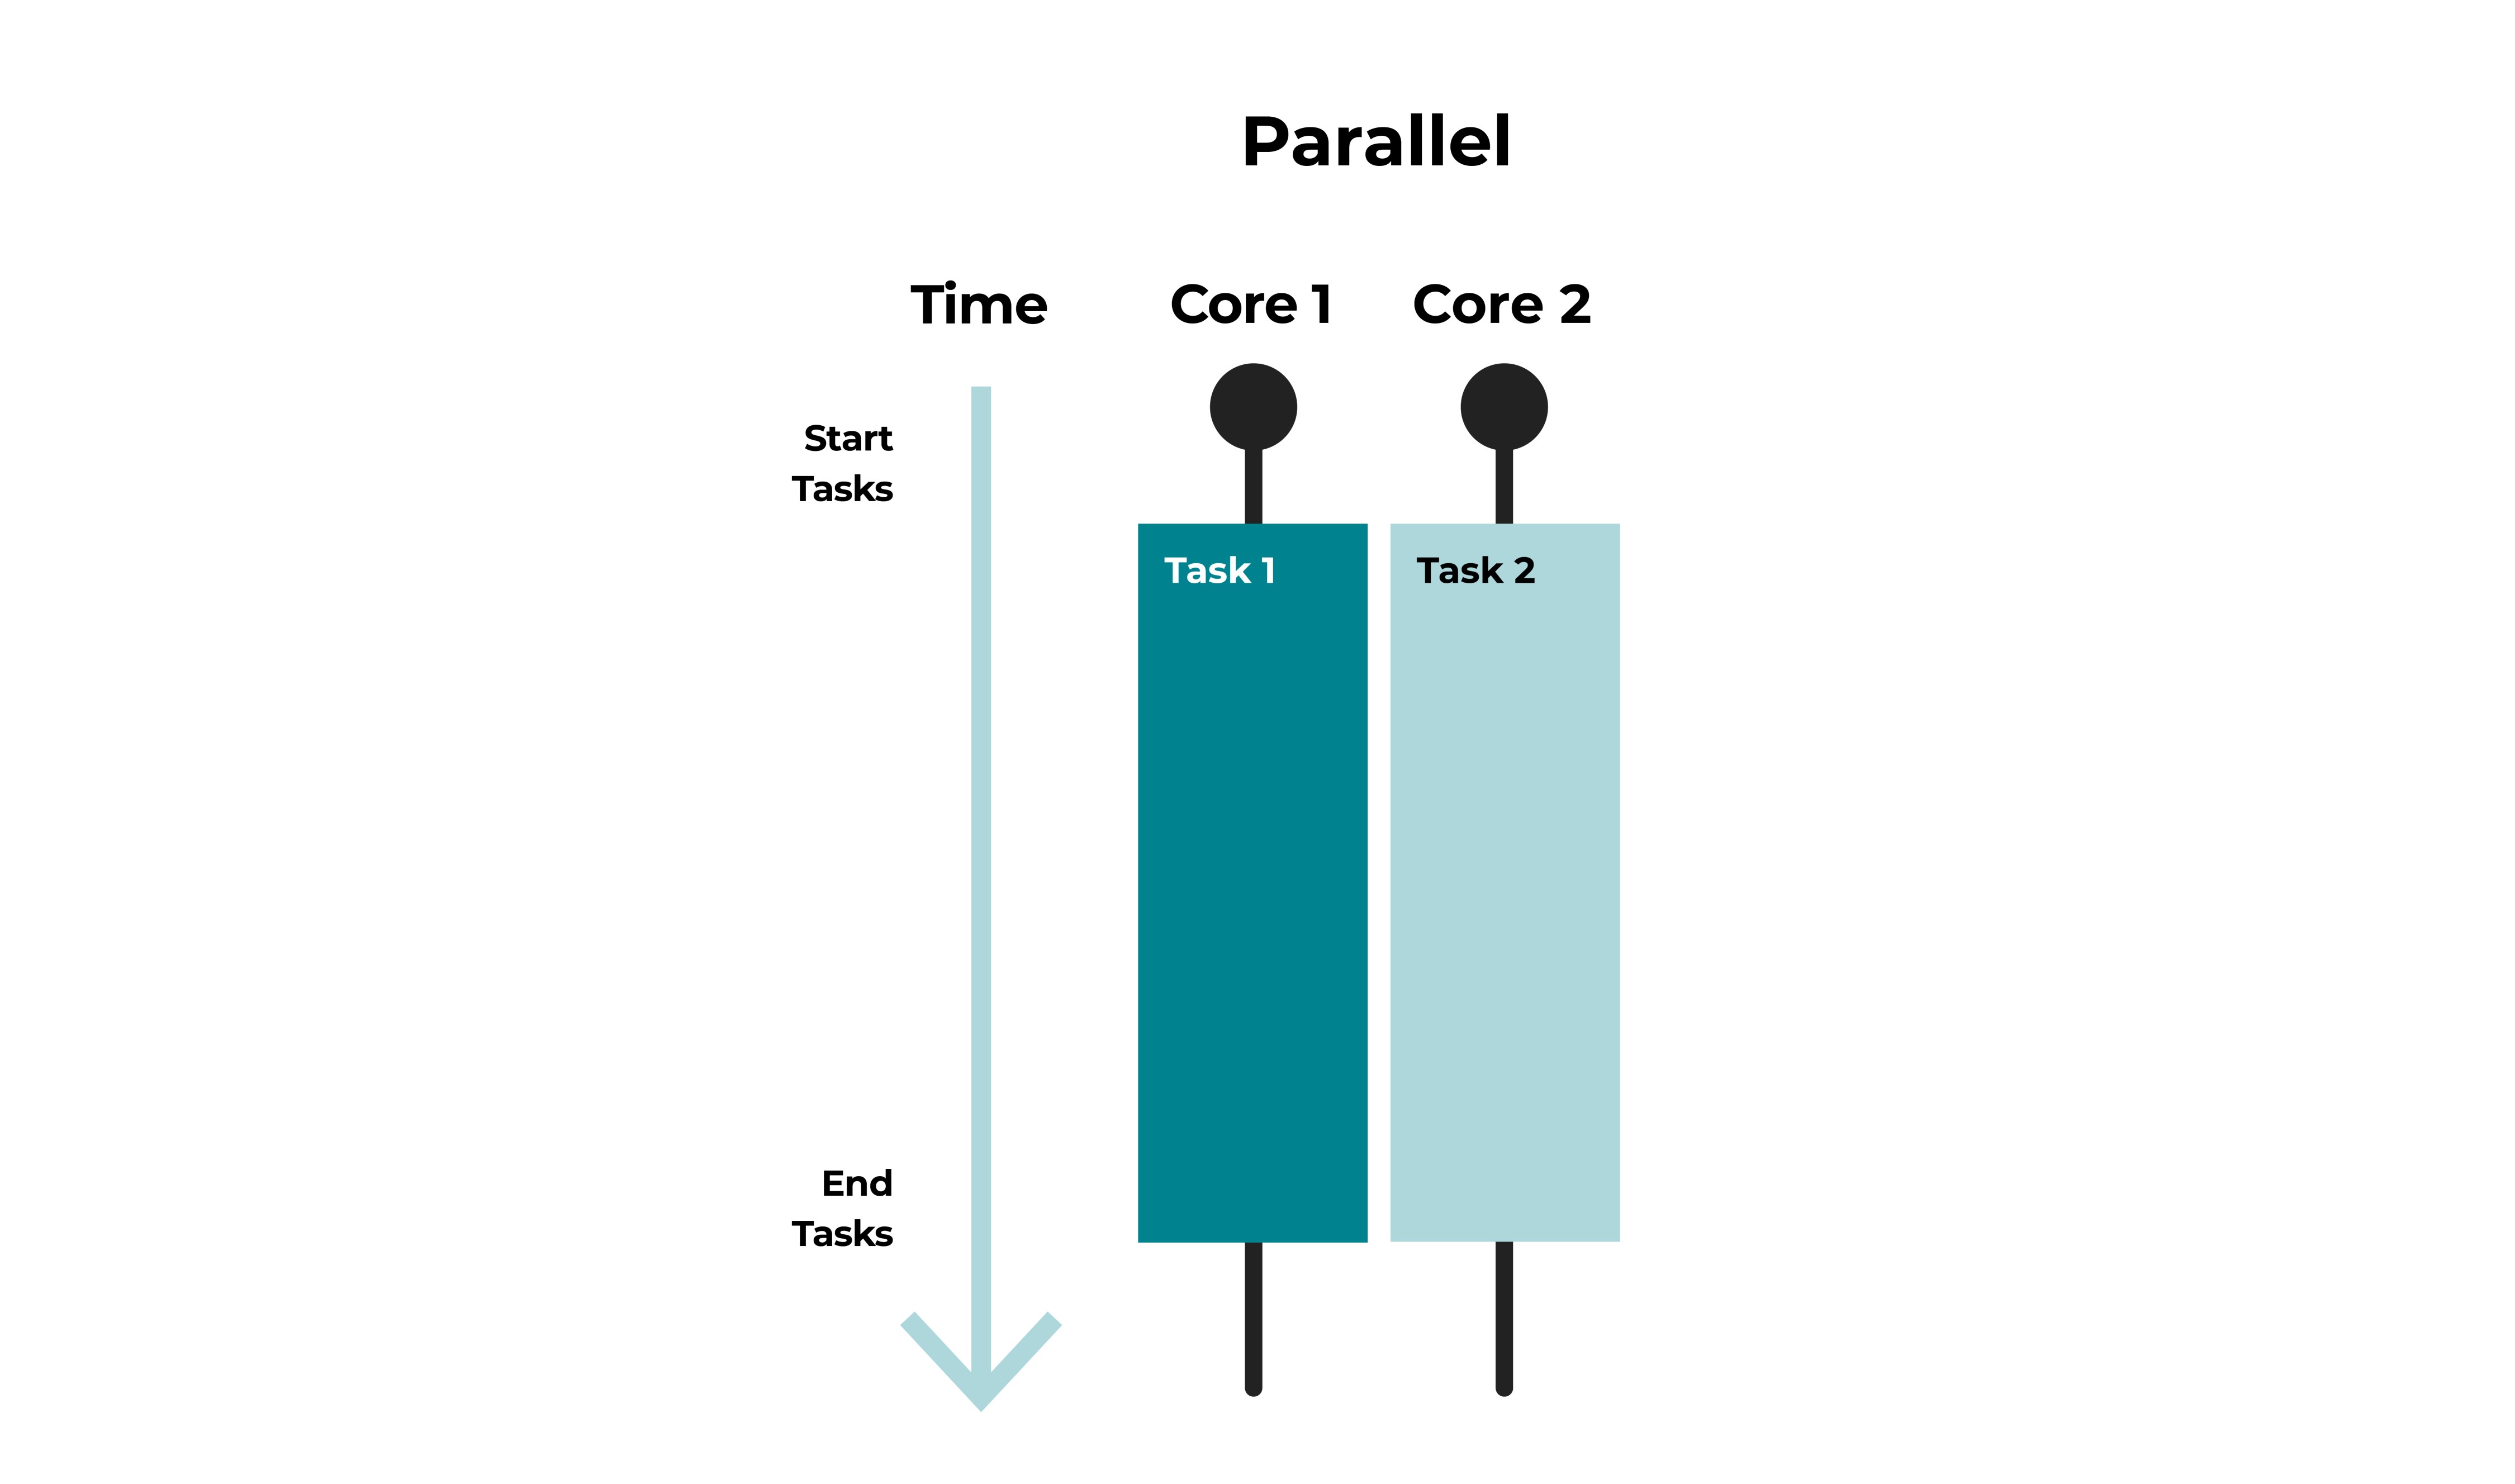 Two tasks begin running together. This helps us fully utilise both cores of our application.